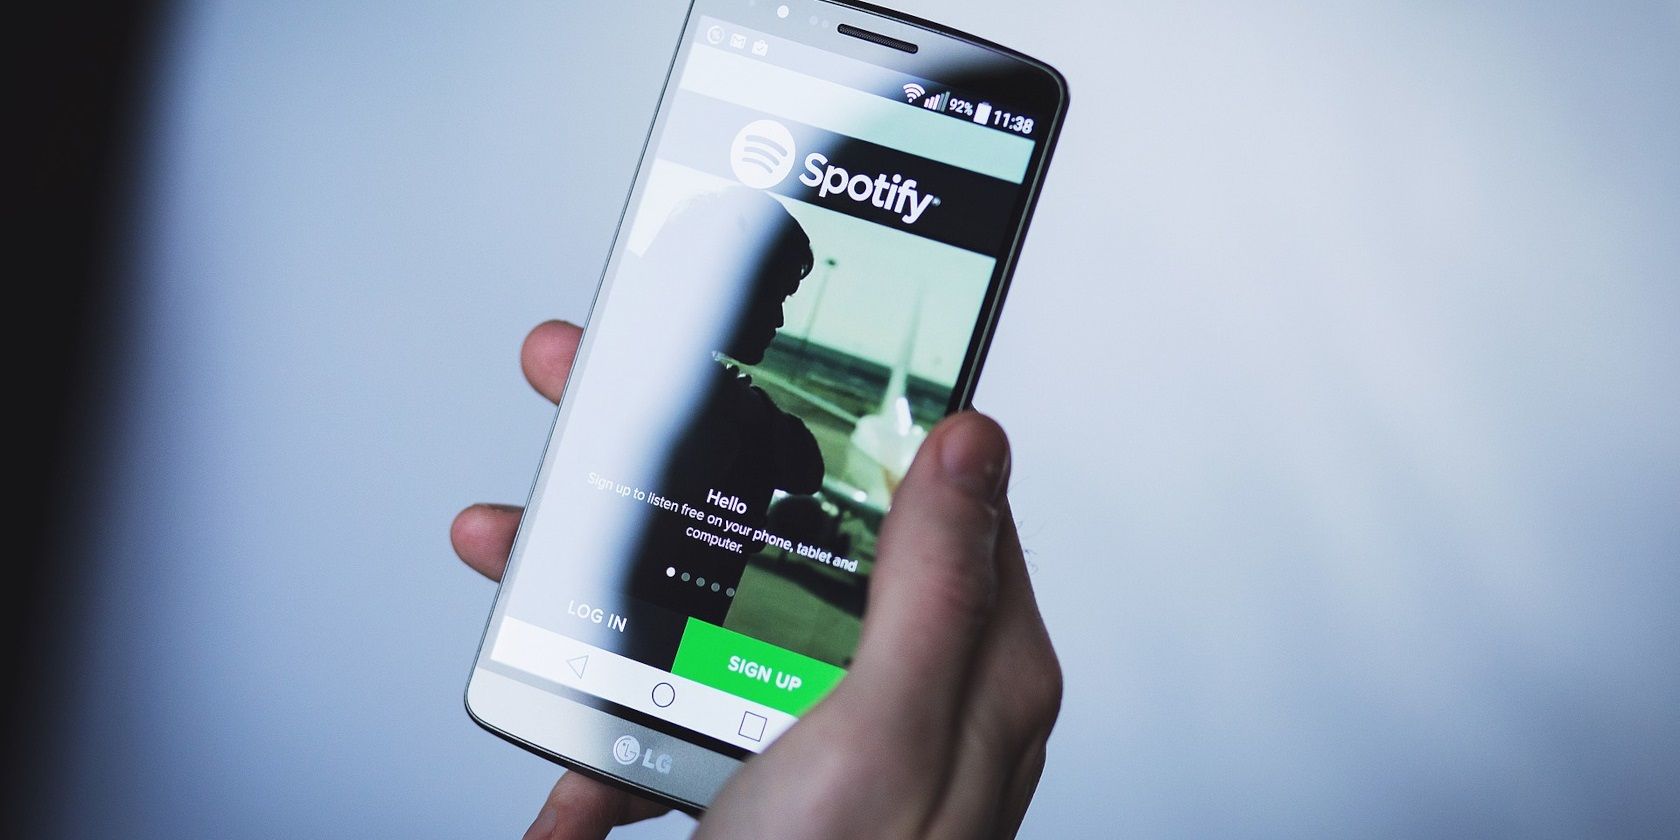 How to Set a Sleep Timer on the Spotify Mobile App